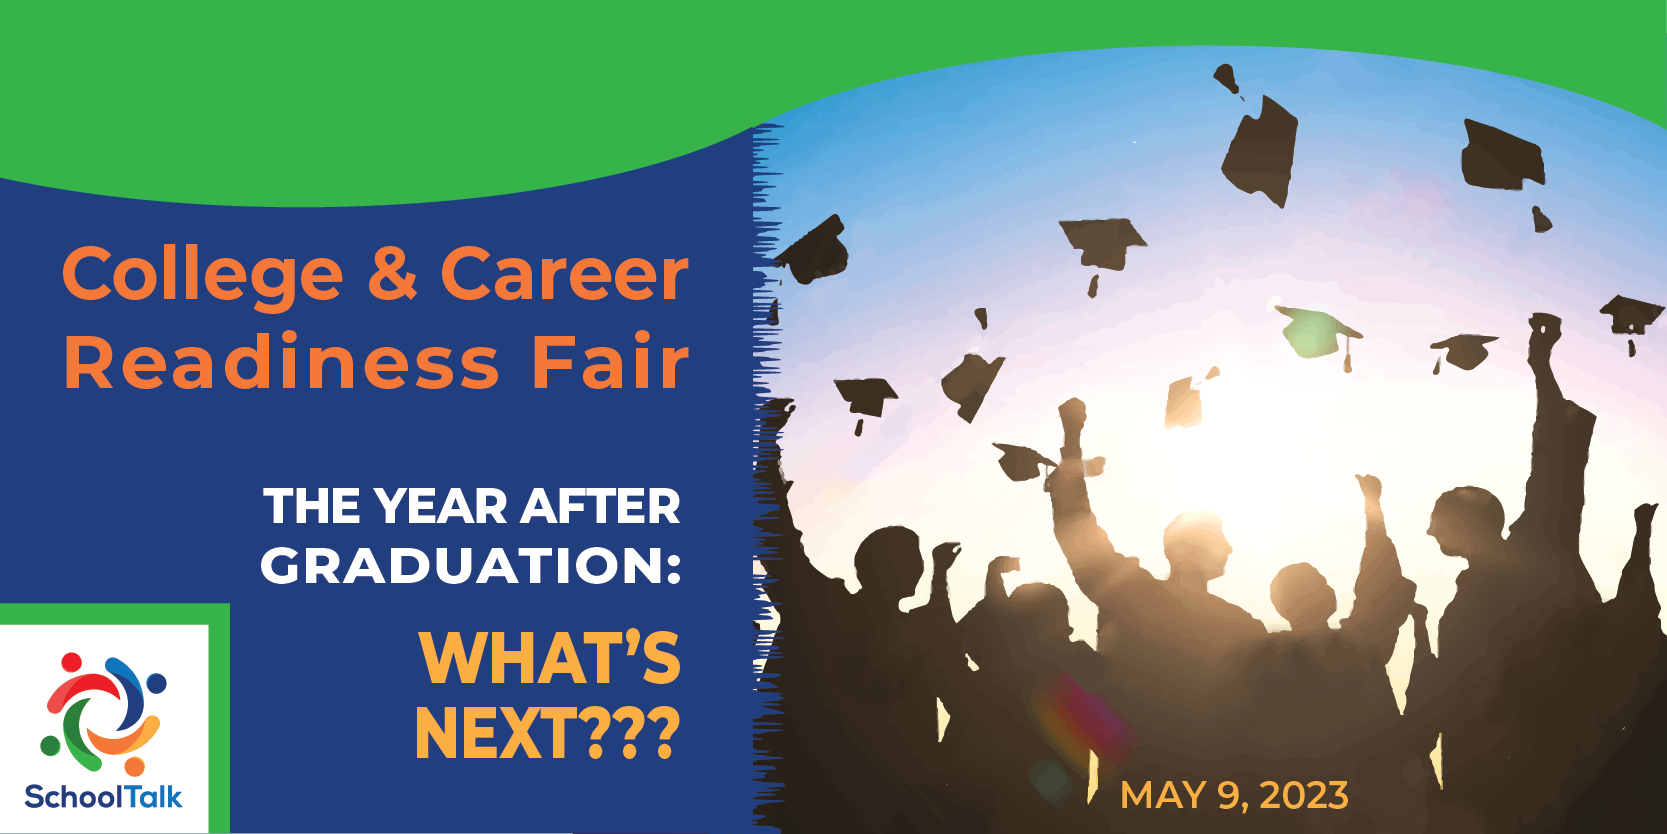 College & Career Readiness Fair. The Year After Graduation: What's Next? SchoolTalk logo. May 9, 2023. Image - silhouette of graduates tosses their caps into a sunny sky.